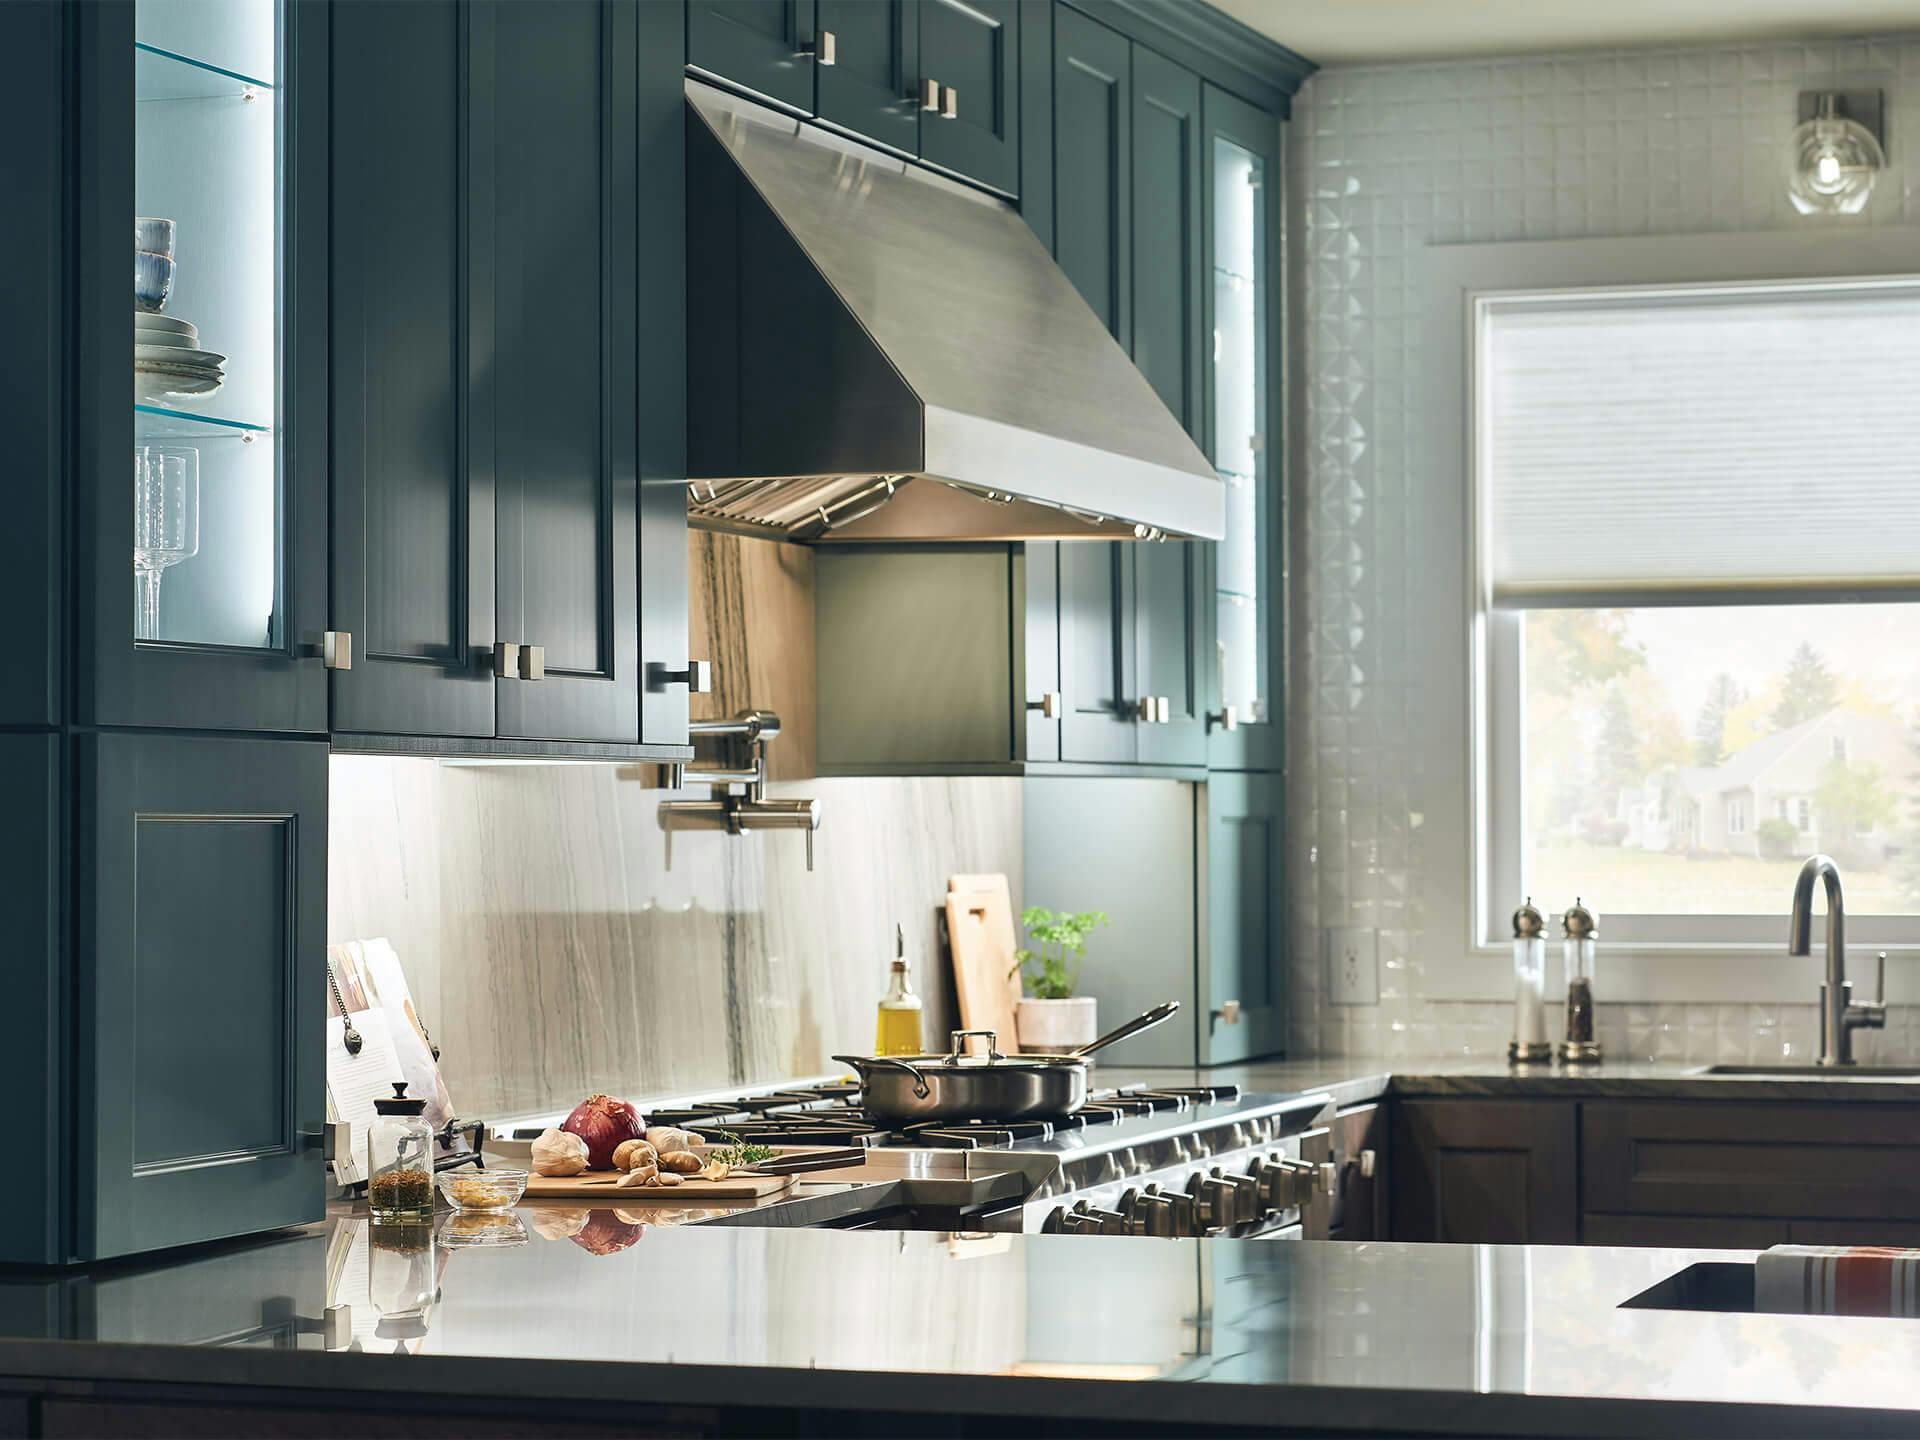 Kitchen setting, centered on the stovetop, with a Harmony wall sconce lighting the wall